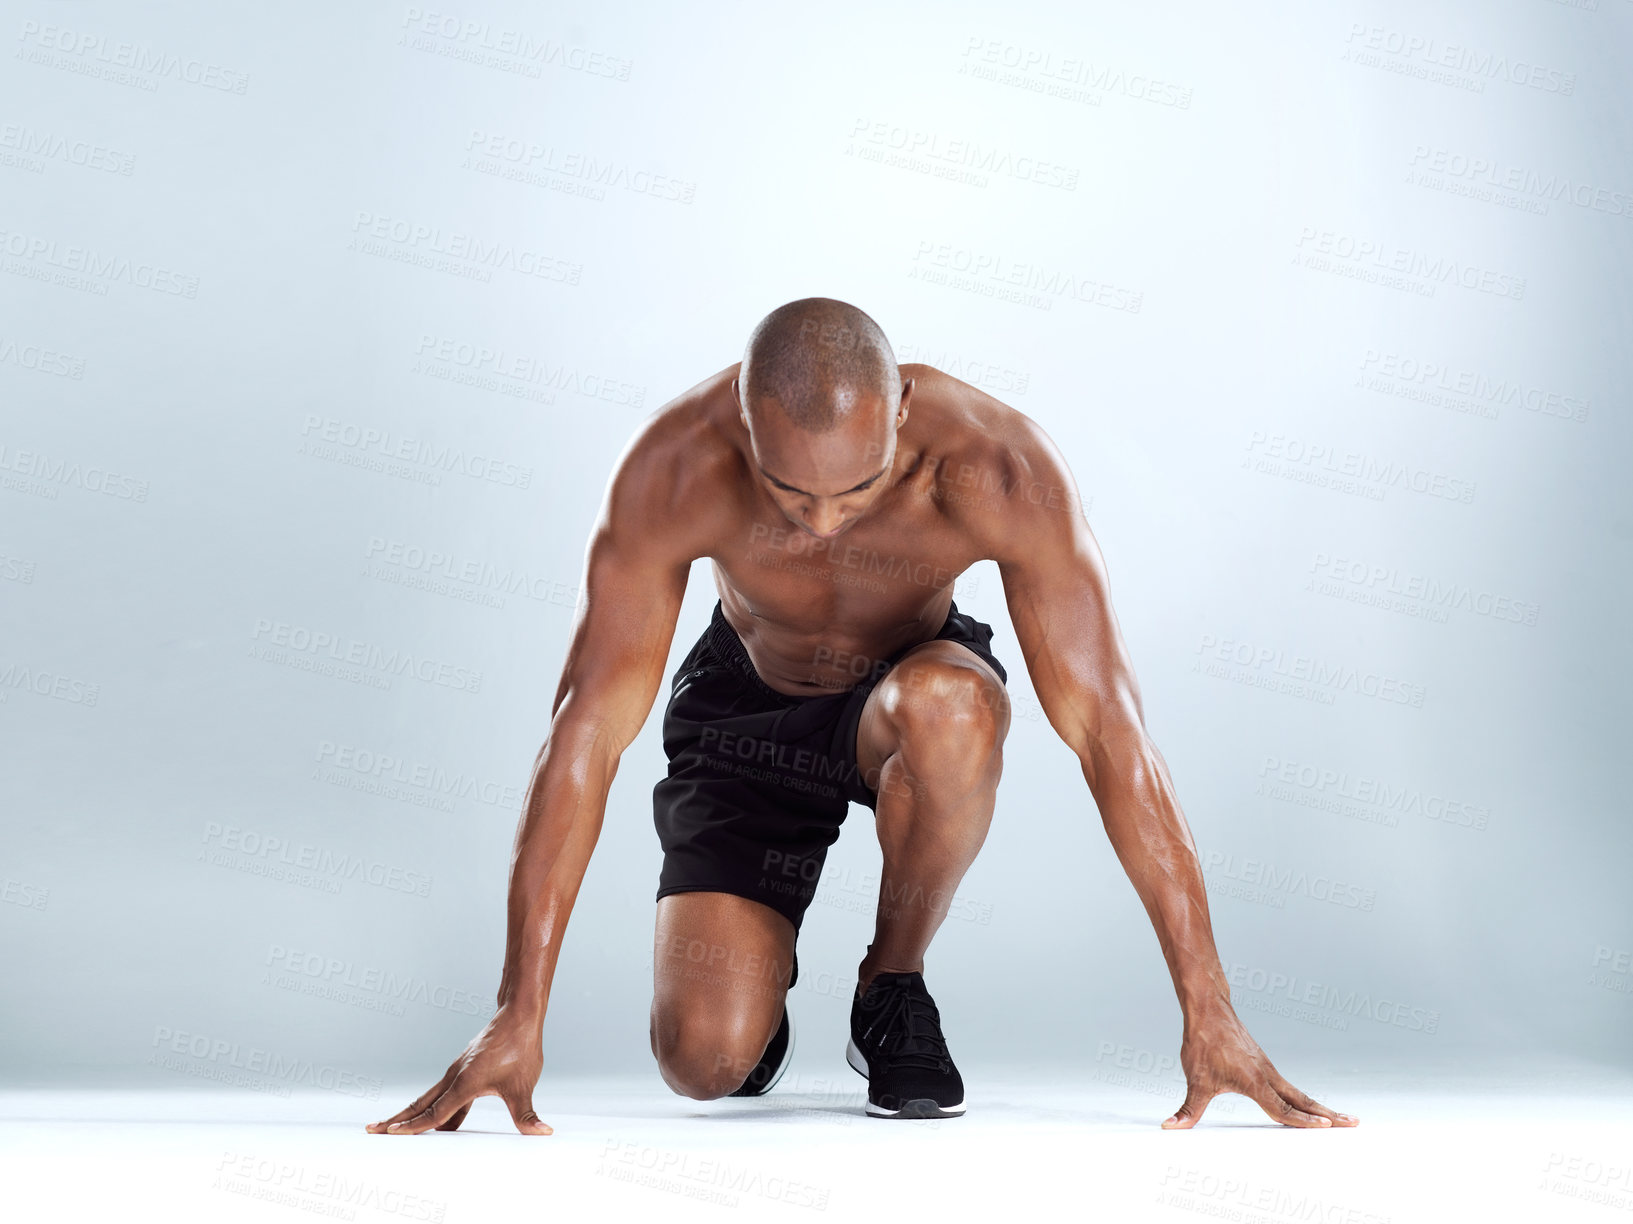 Buy stock photo Studio shot of an athletic young man doing stretching exercises while posing against a grey background